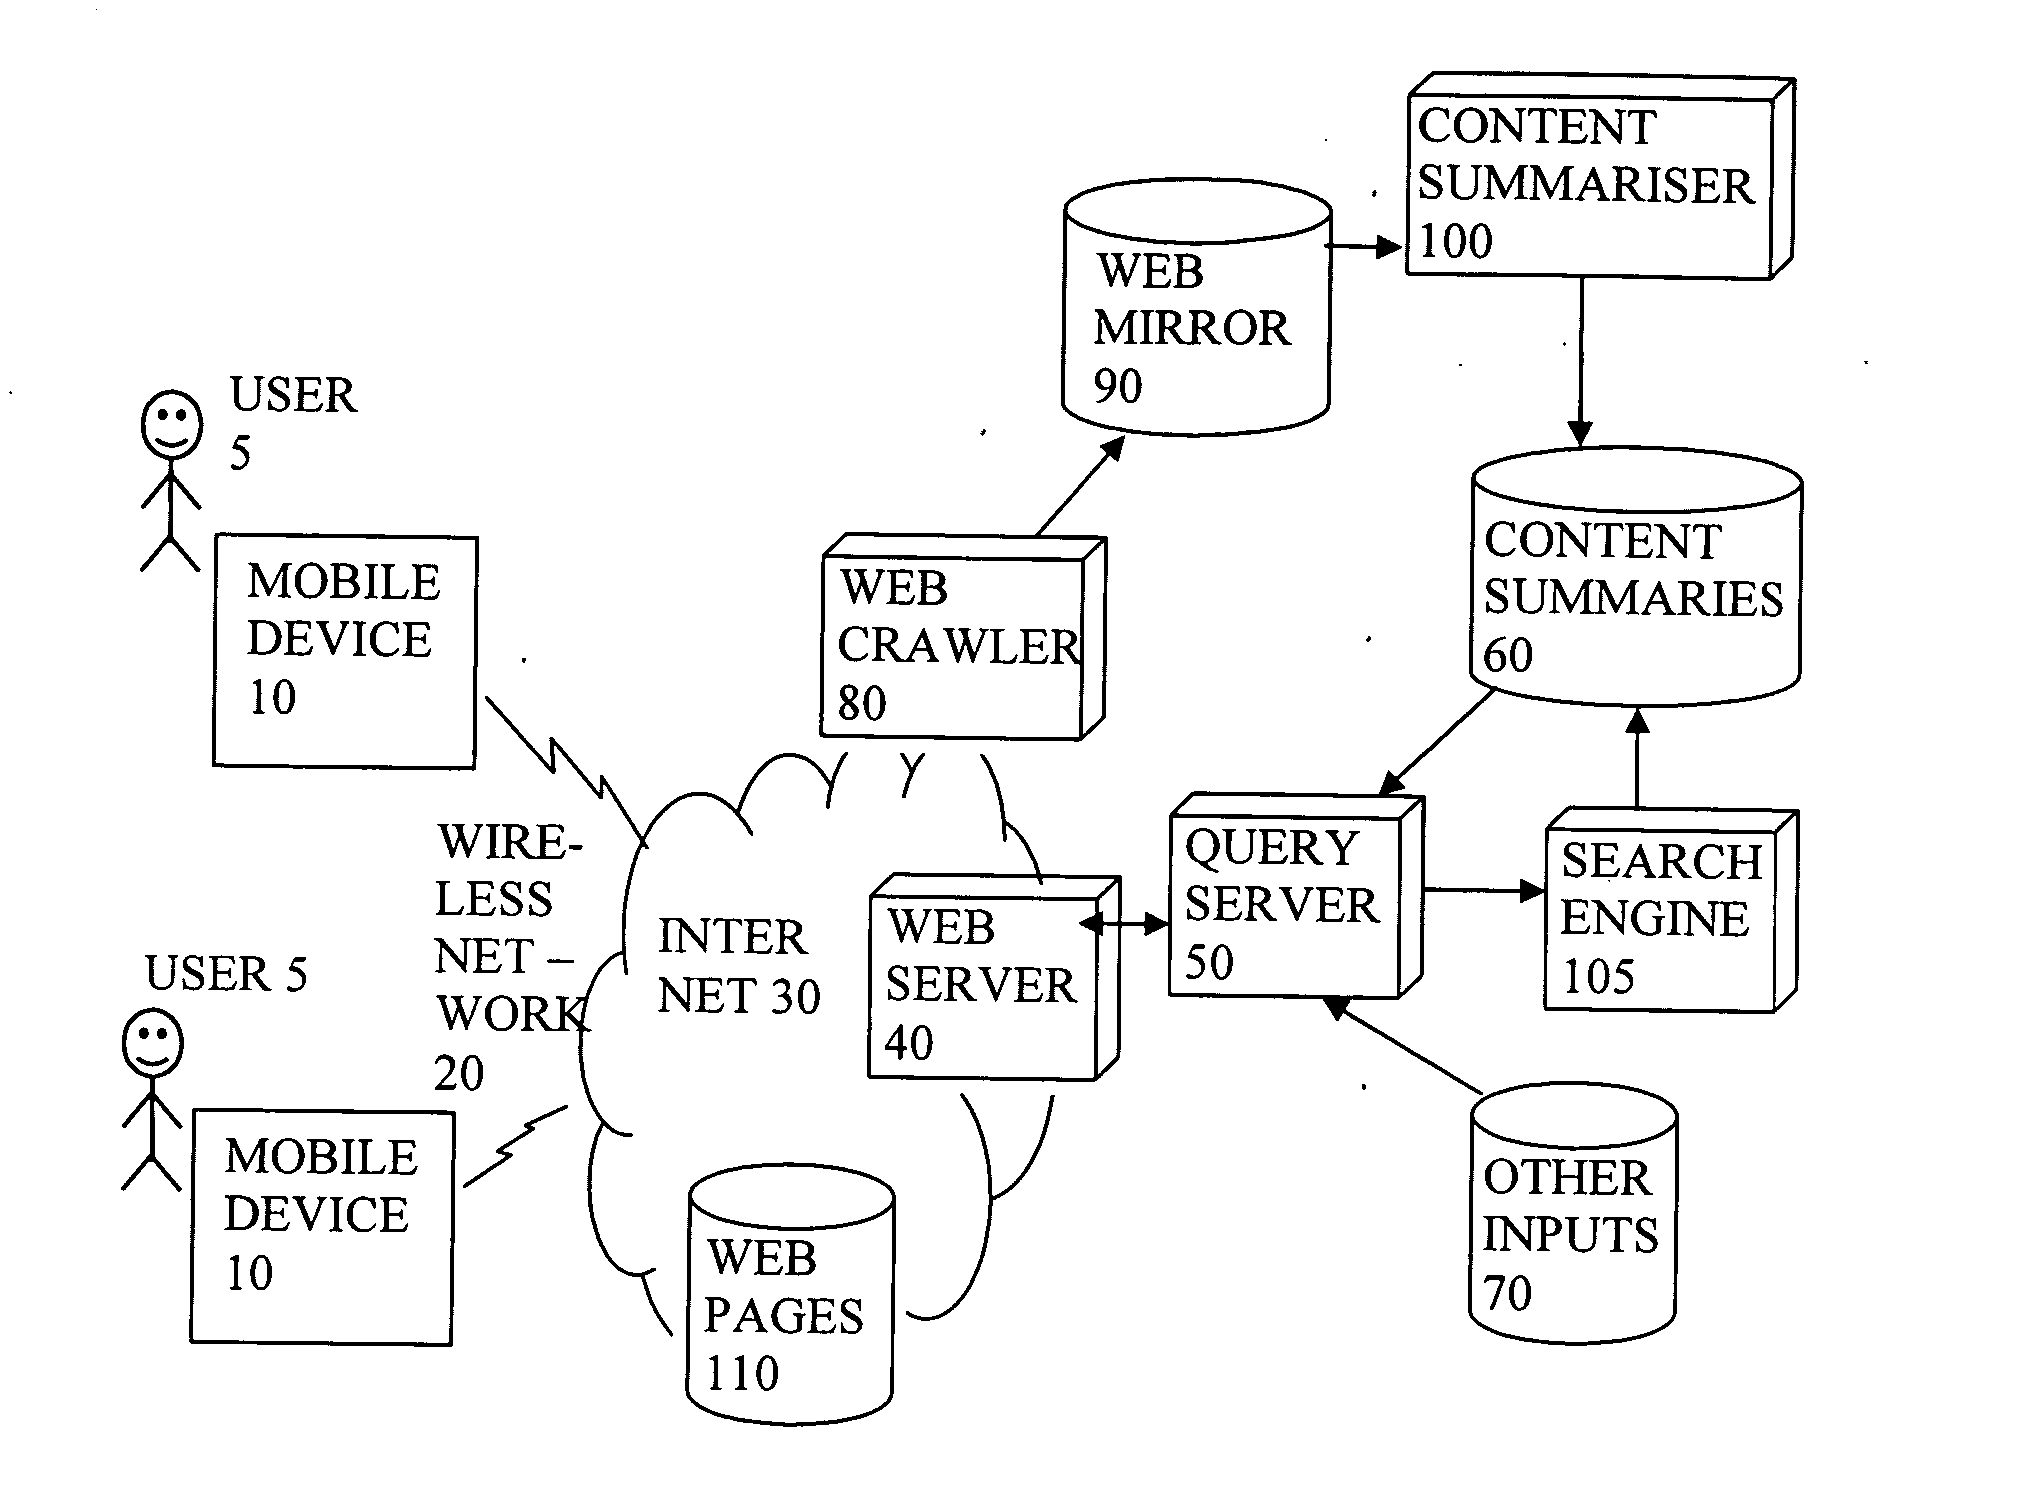 Processing and sending search results over a wireless network to a mobile device